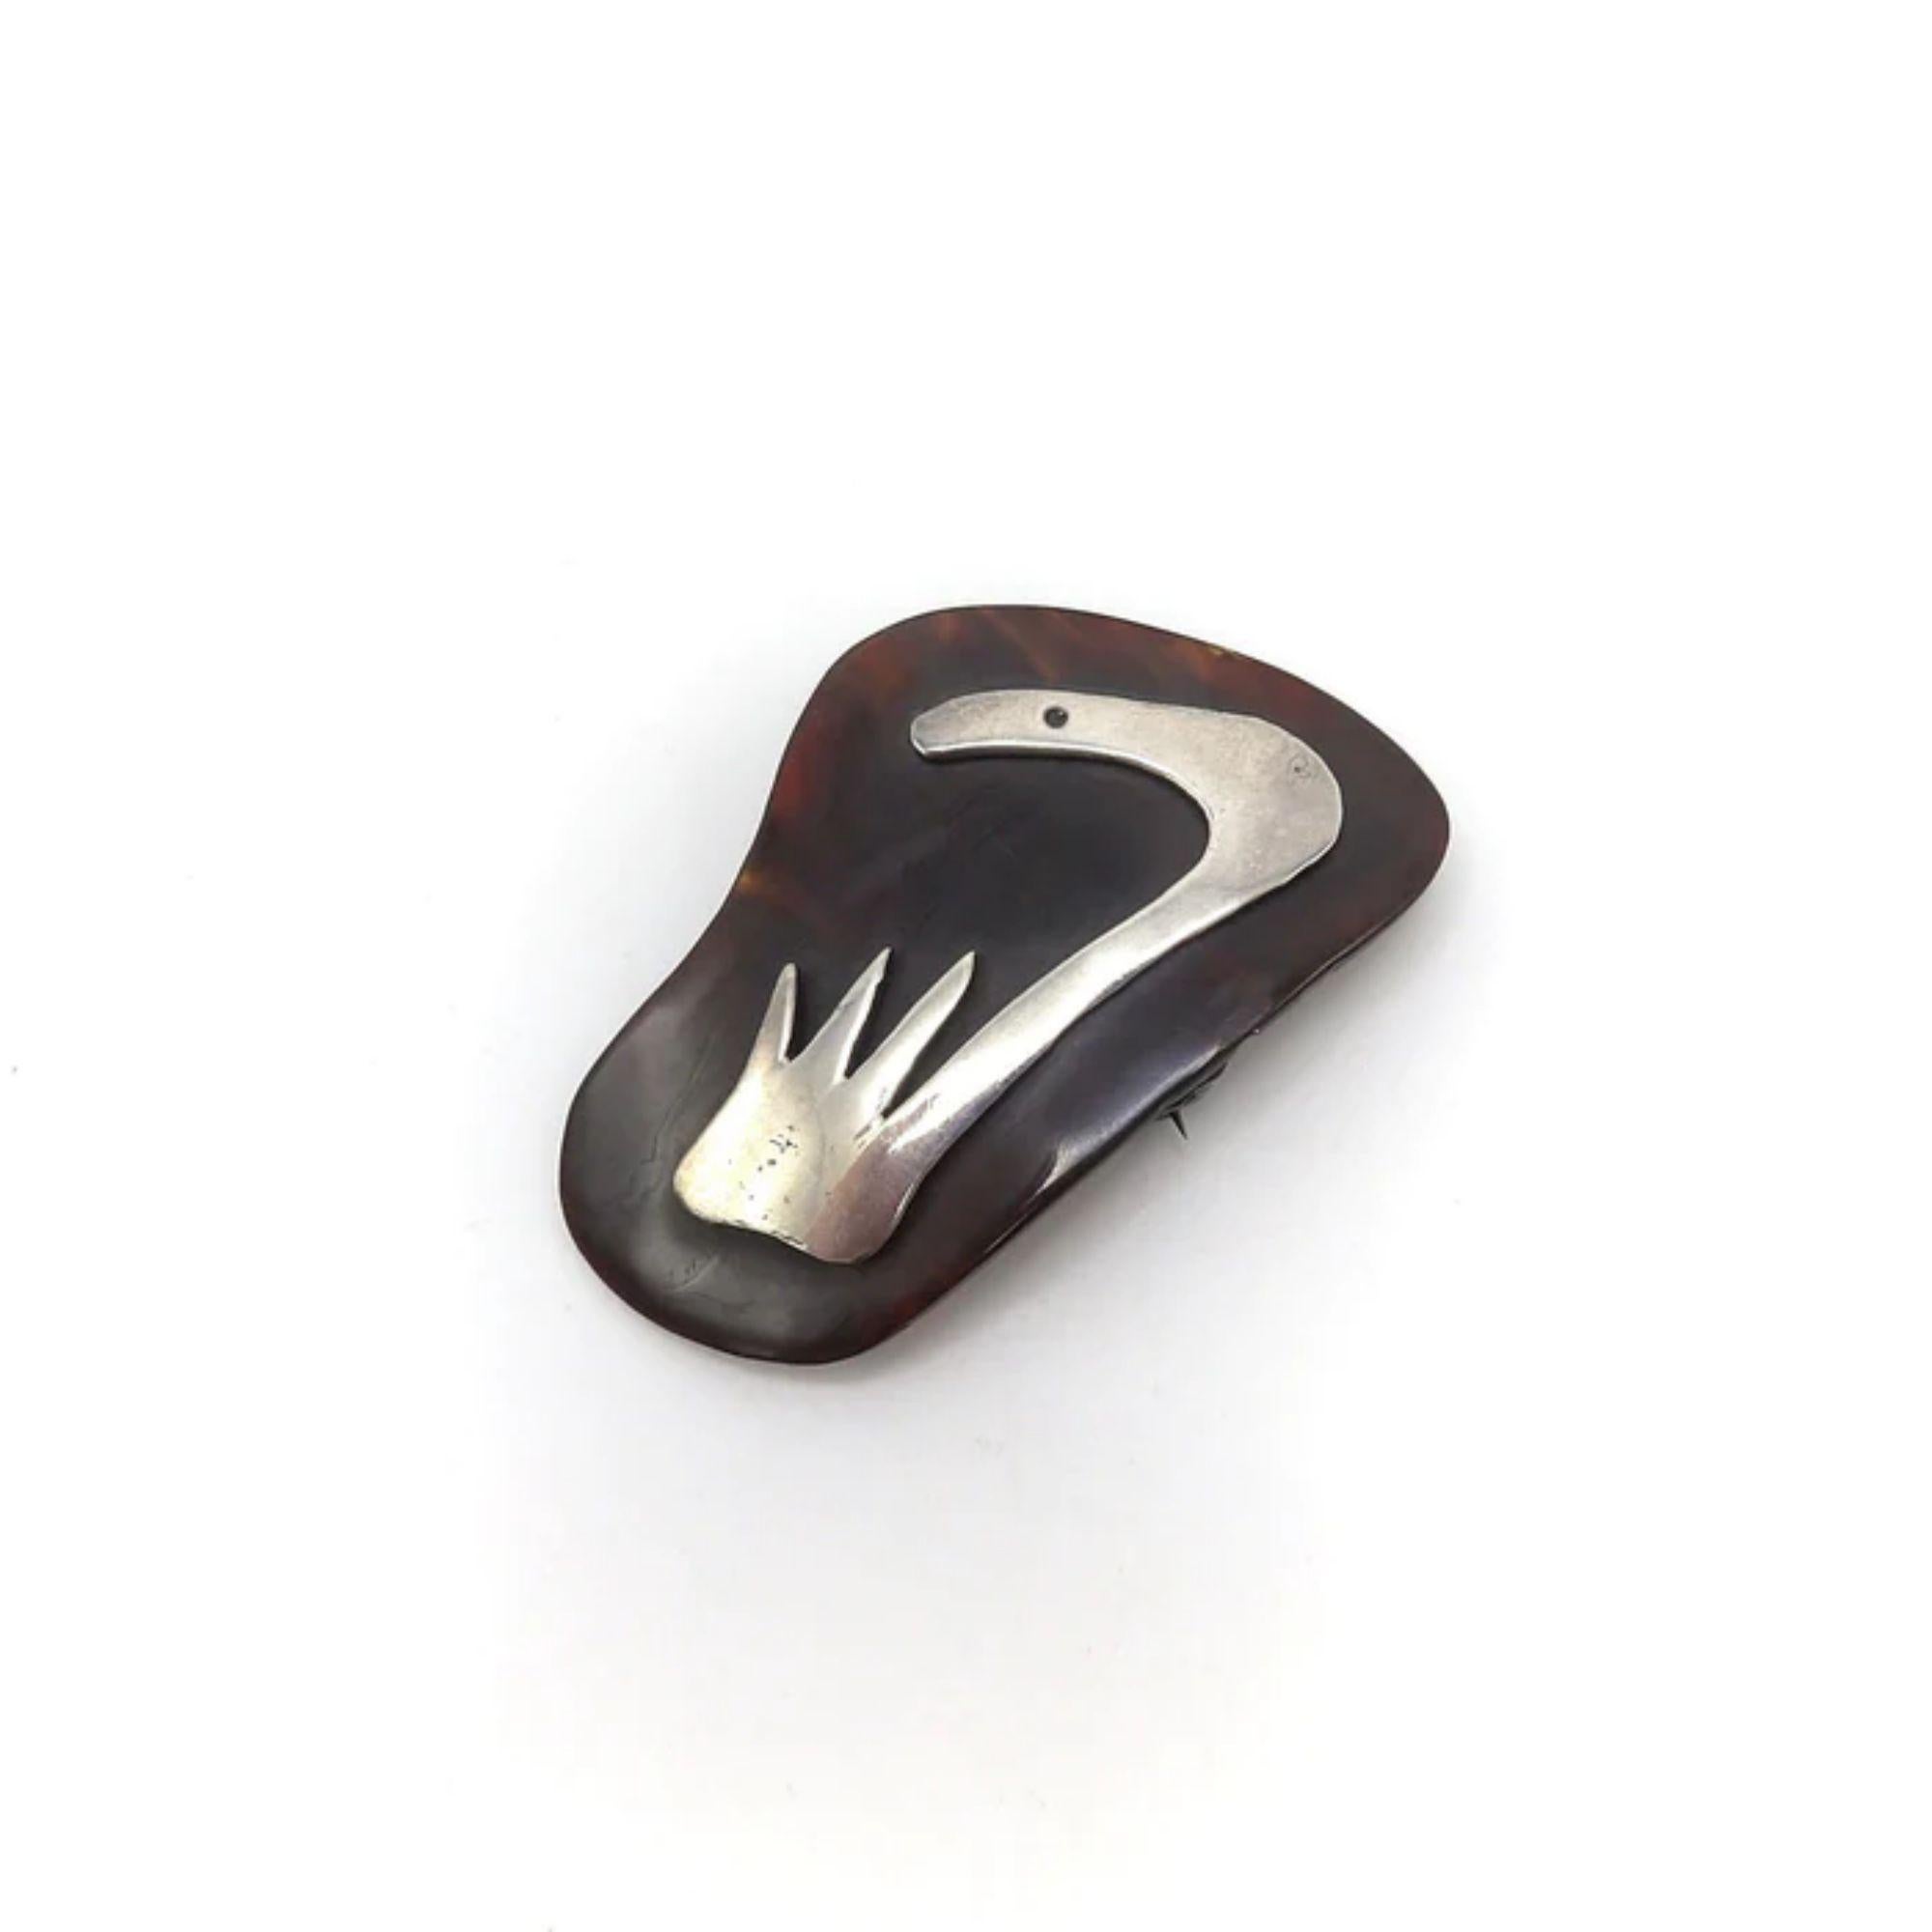 A striking Taxco, Mexico, brooch with an abstracted sterling silver design on a dark brown tortoise shell. The design leaves a lot to the imagination, looking a bit like a snake's head peaking out above some grass. The silver is cut graphically, and